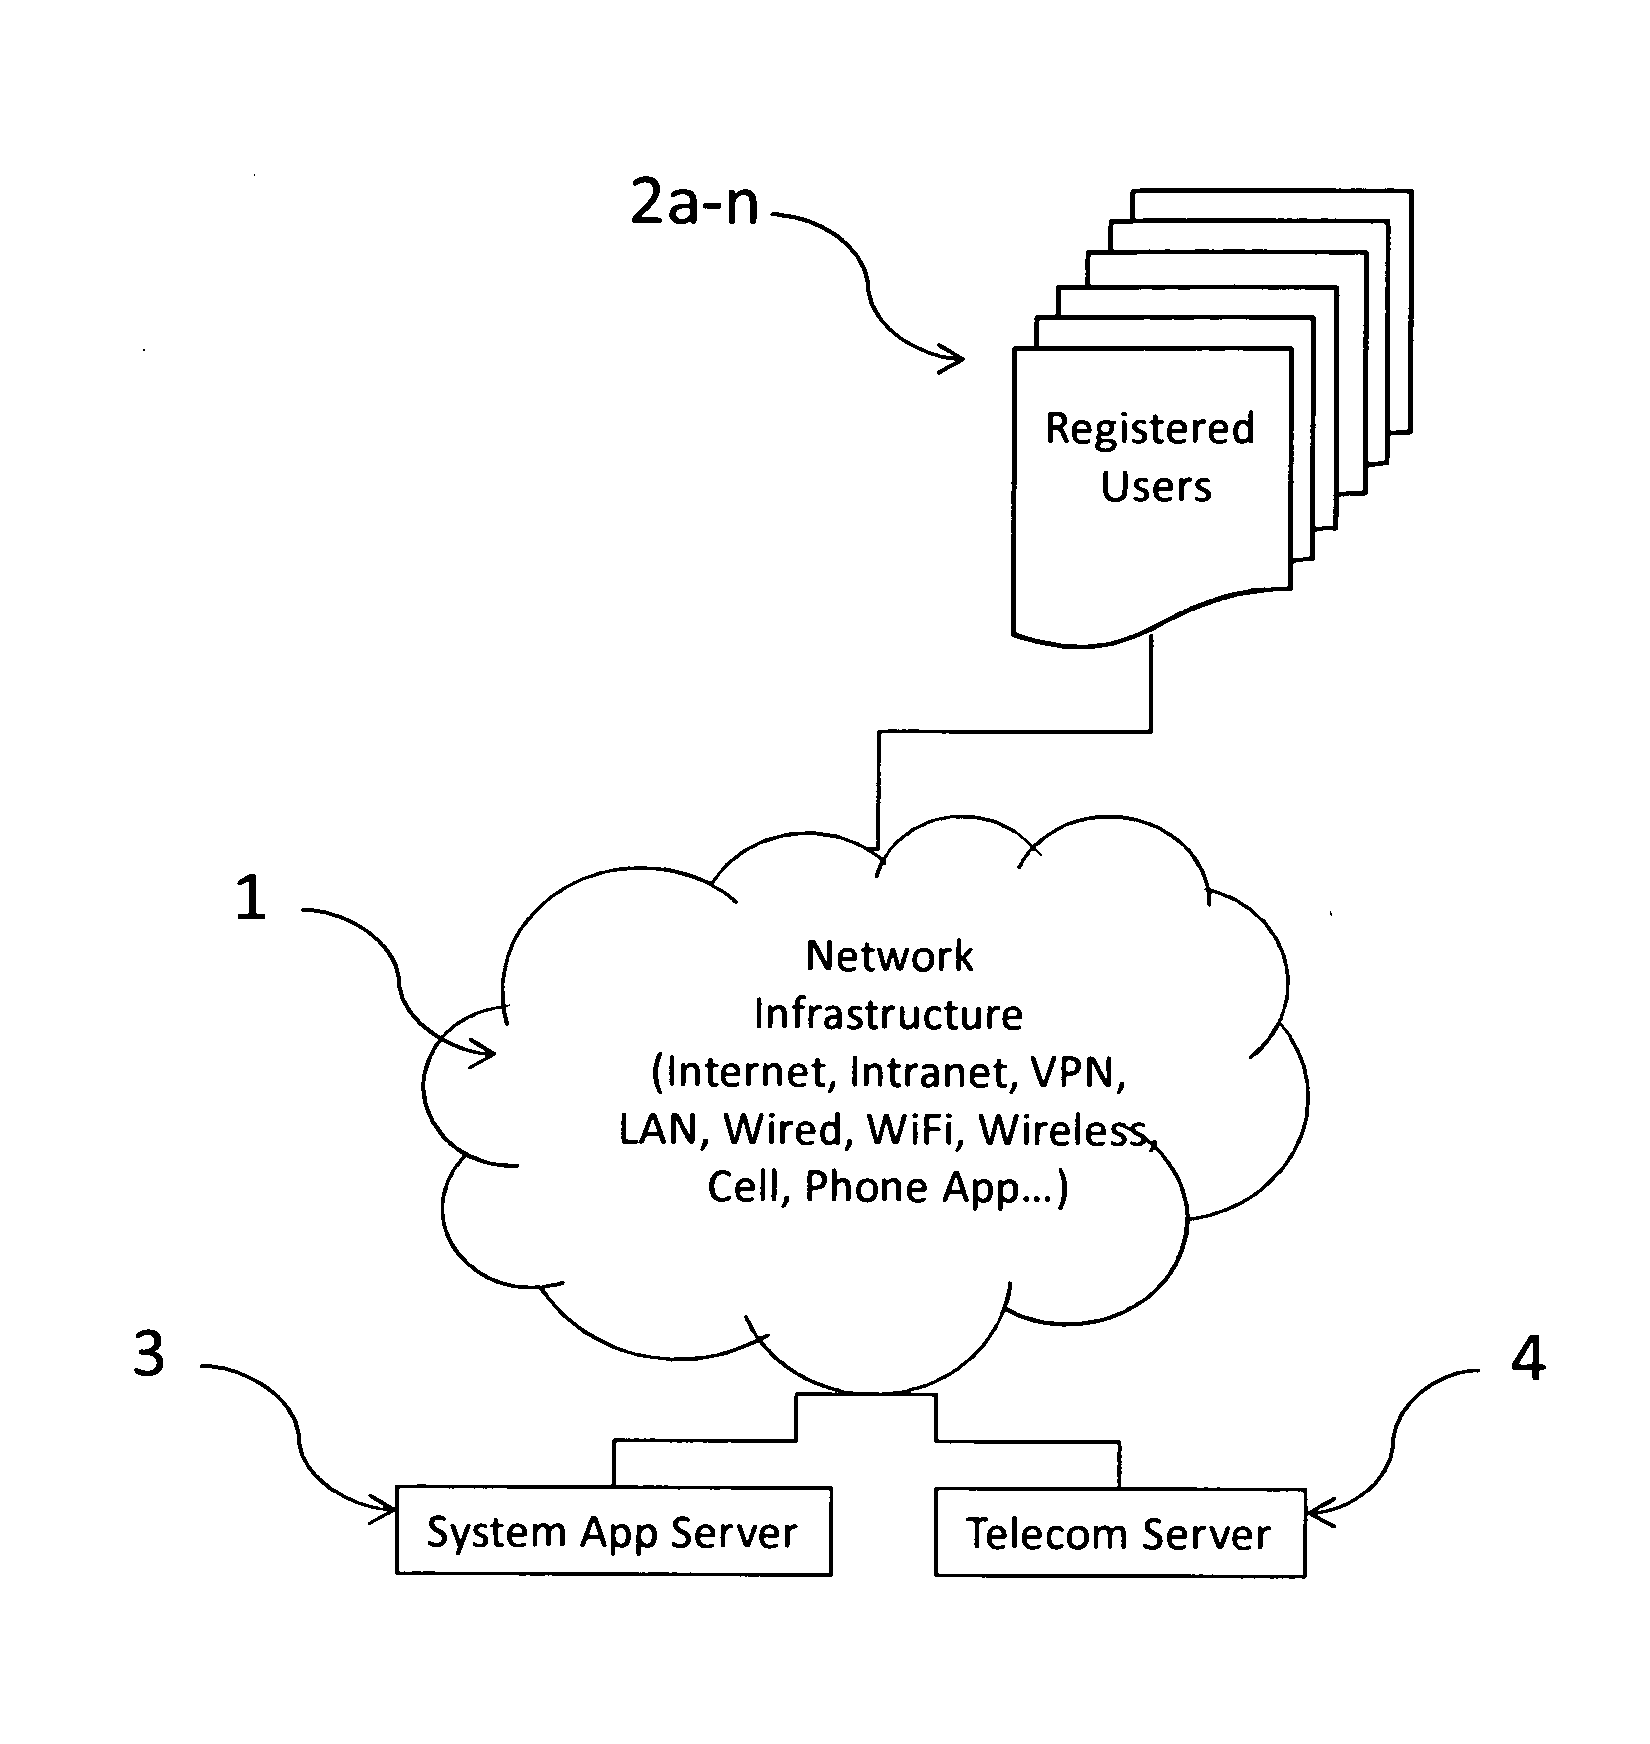 System for enabling interactive socialization of users at a location or geographic radius thereof